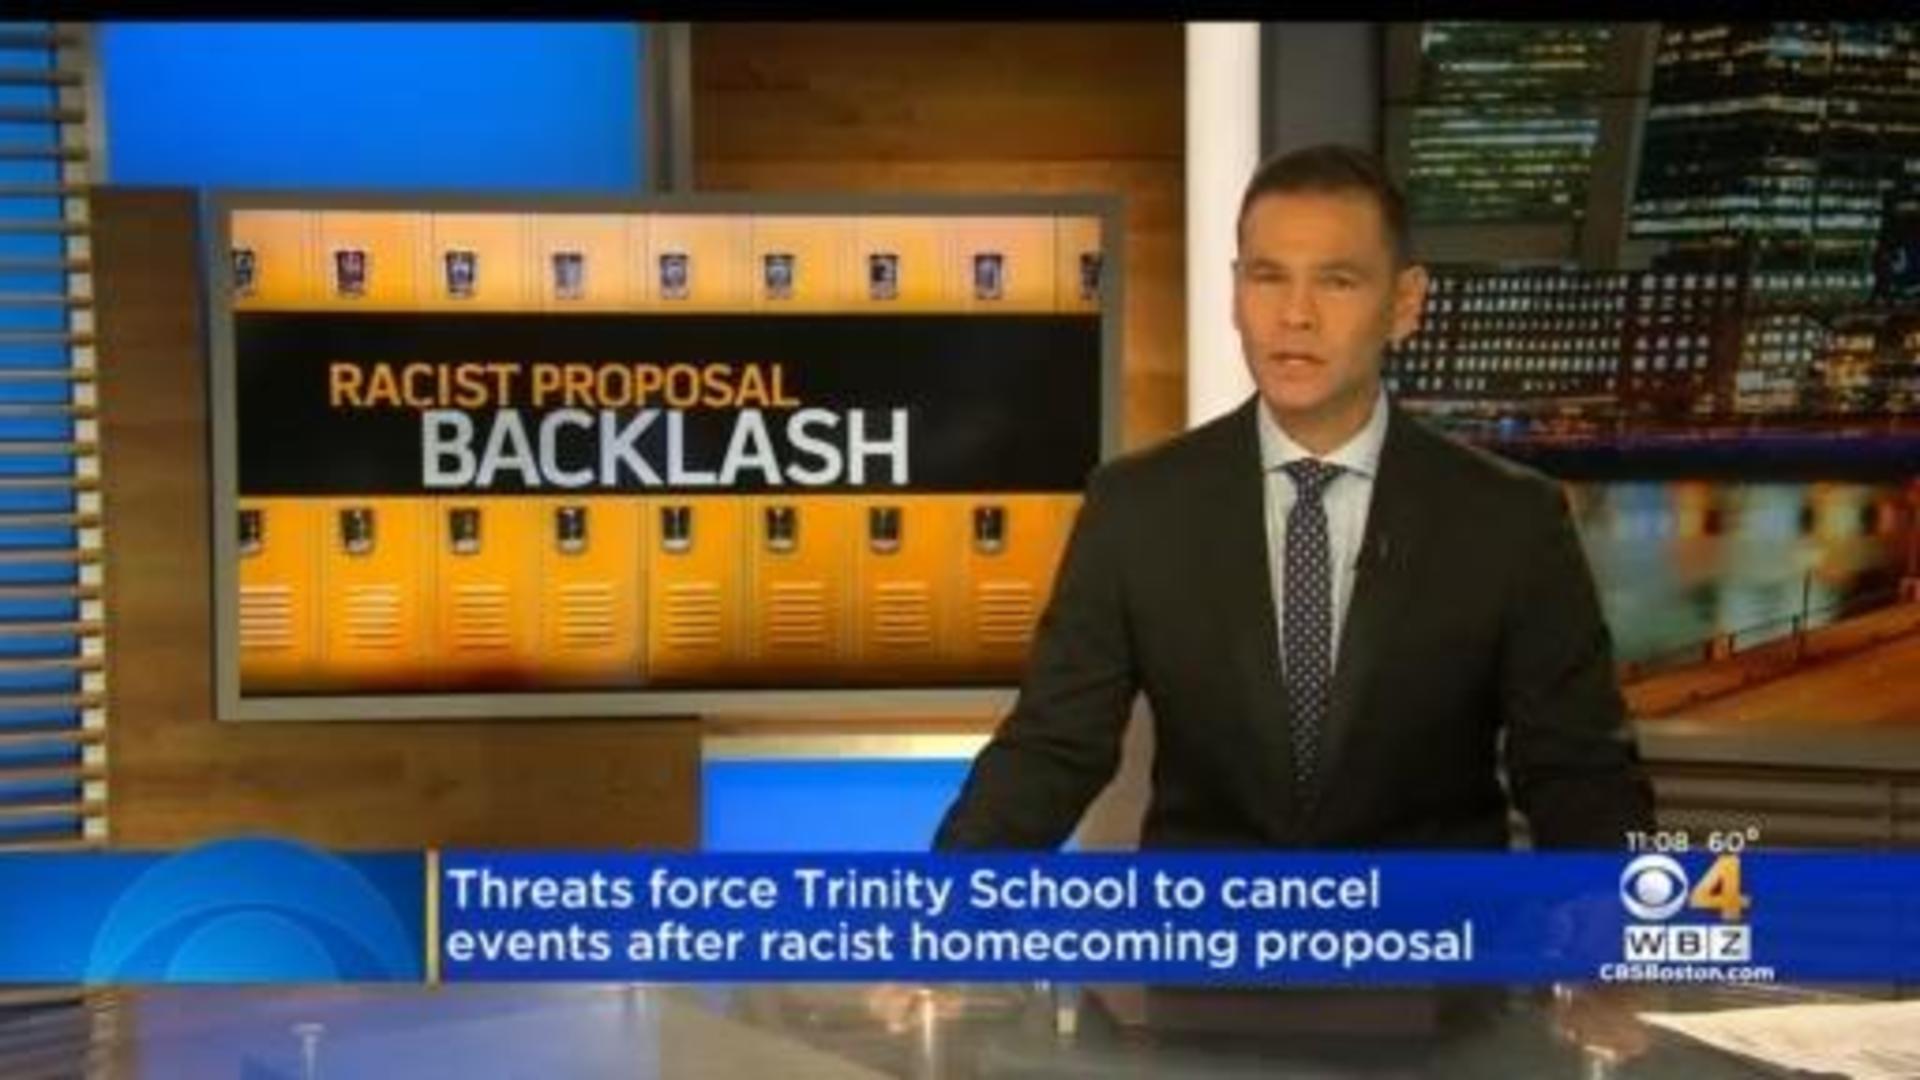 Trinity High School cancels classes on Thursday for 'unspecified threat